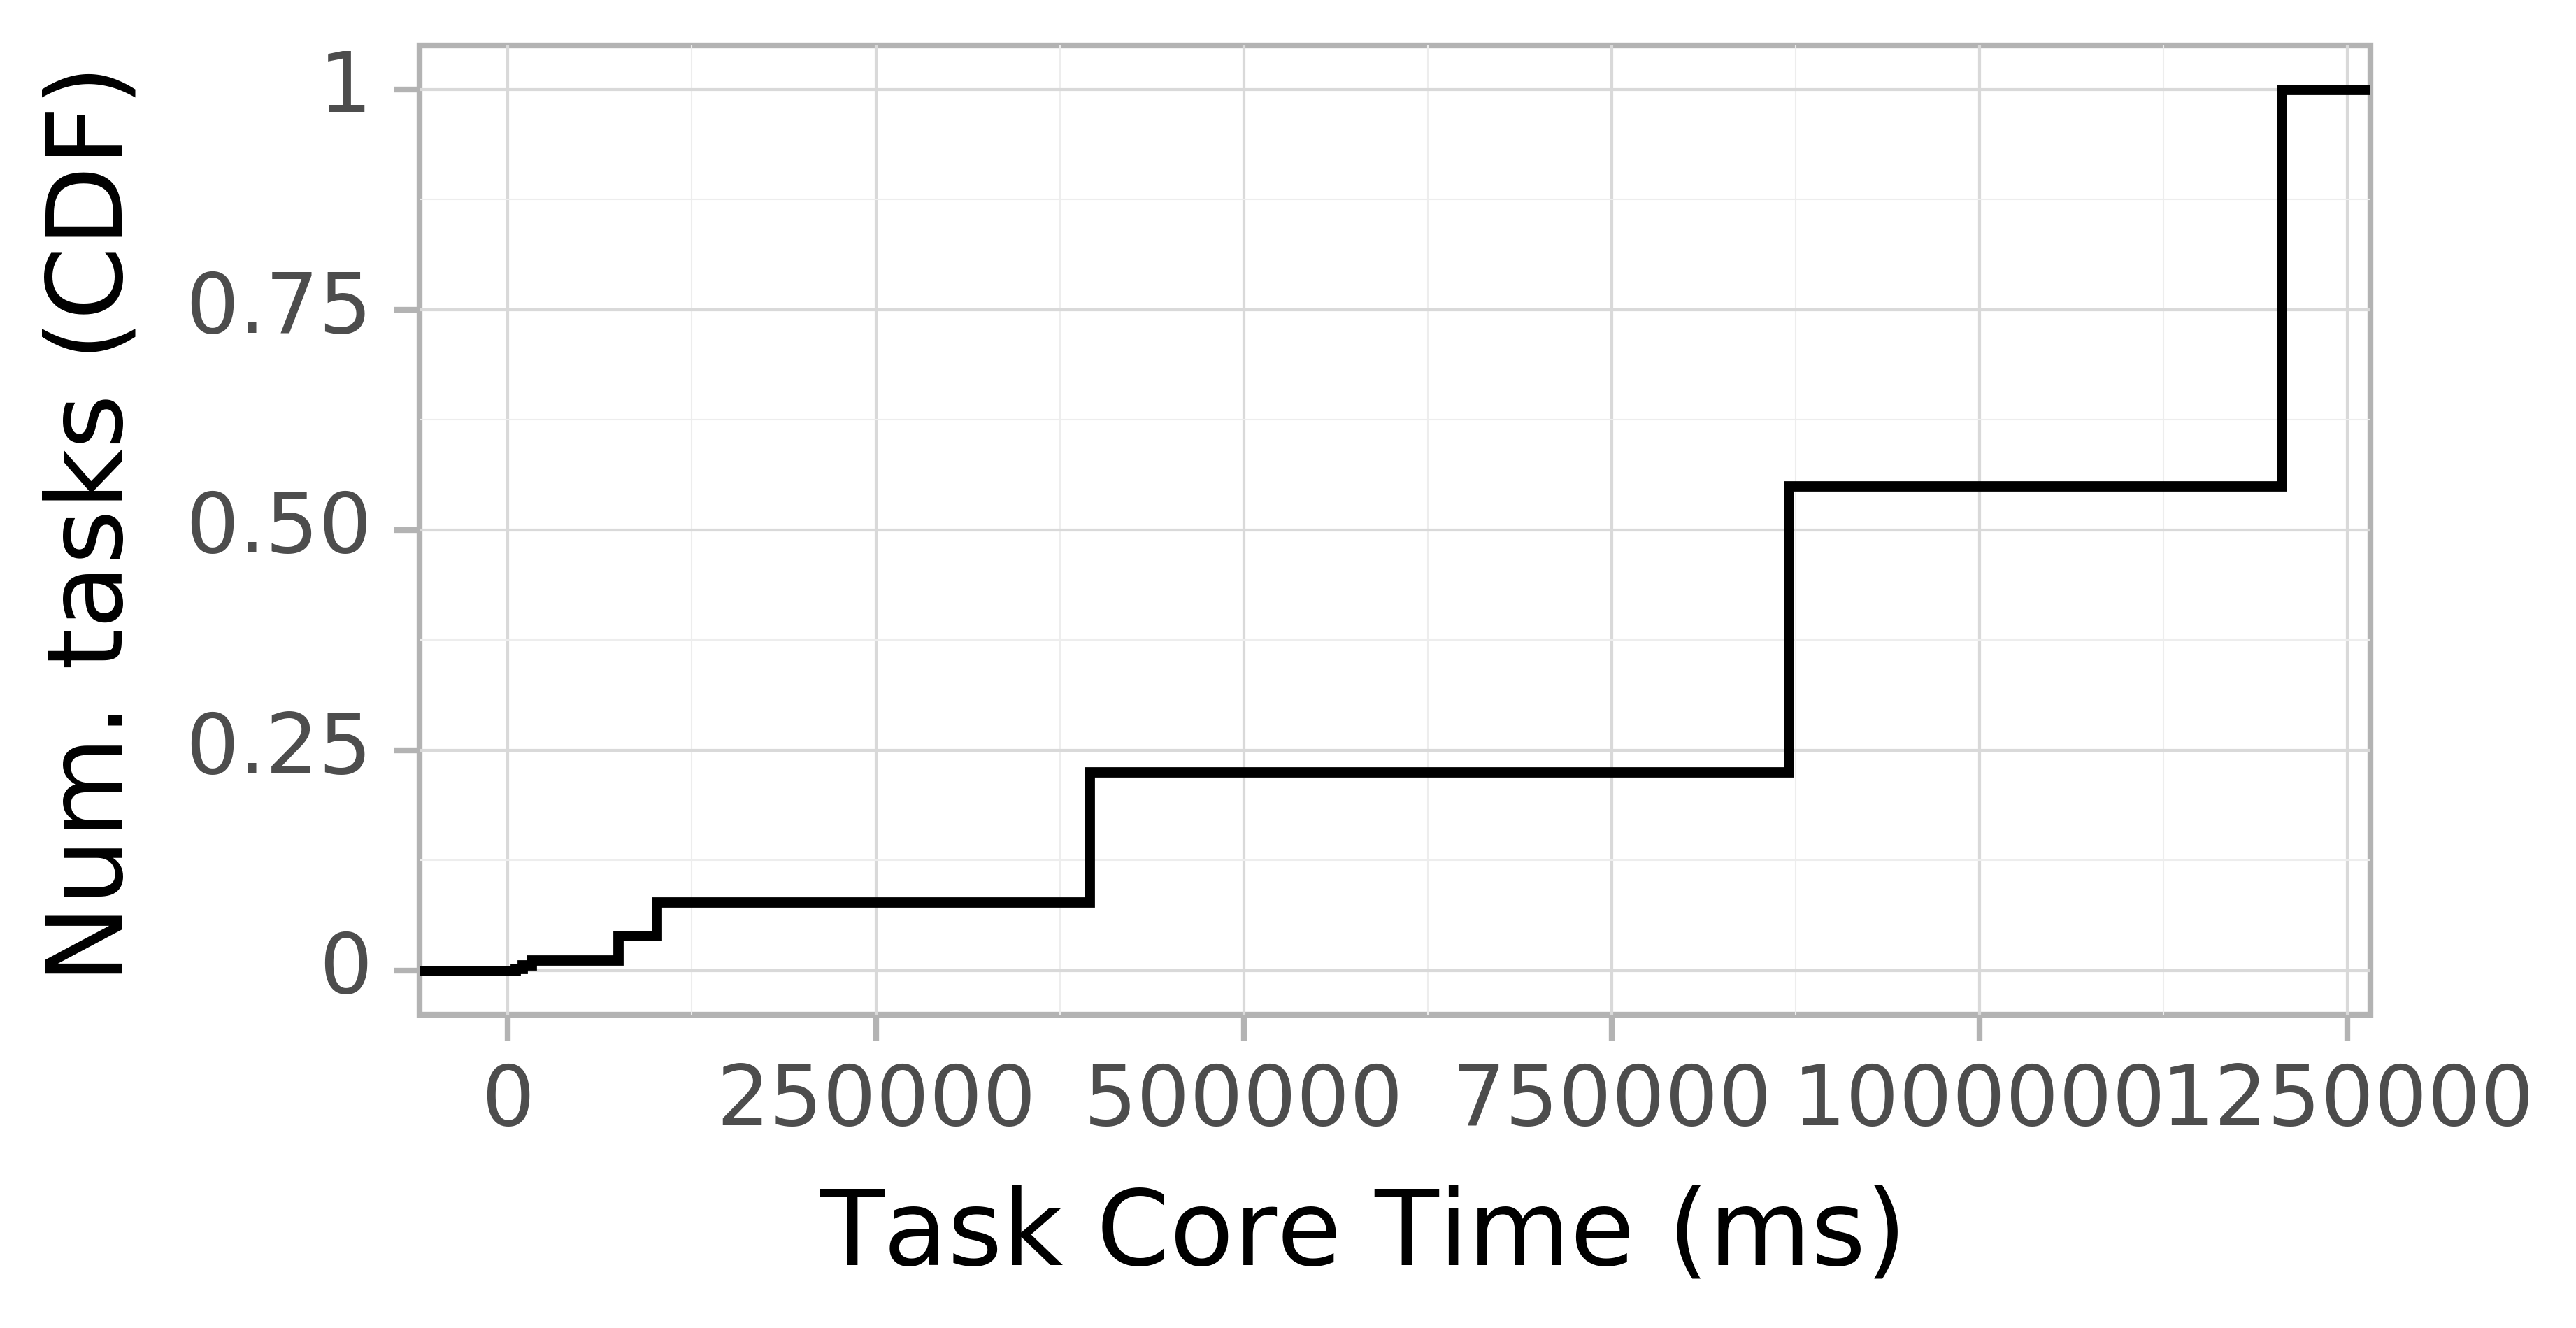 task resource time CDF graph for the Pegasus_P4 trace.